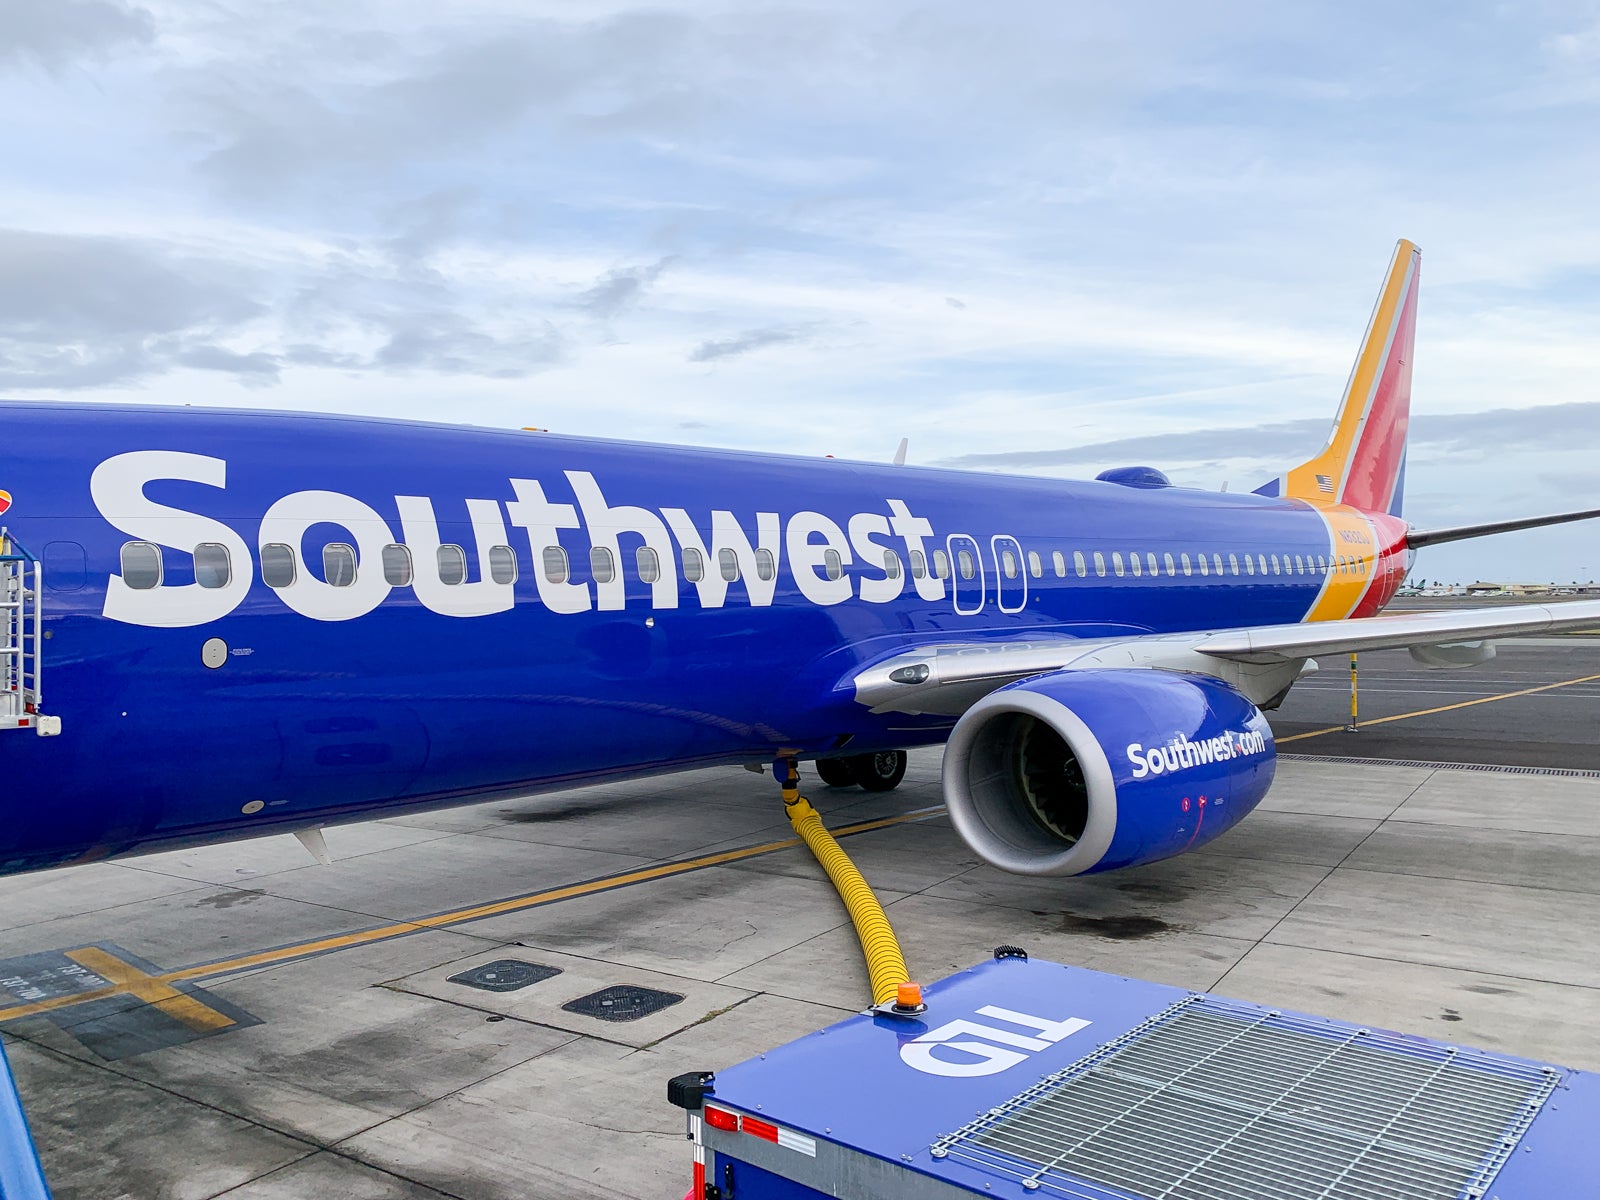 southwest airlines hawaii promotion